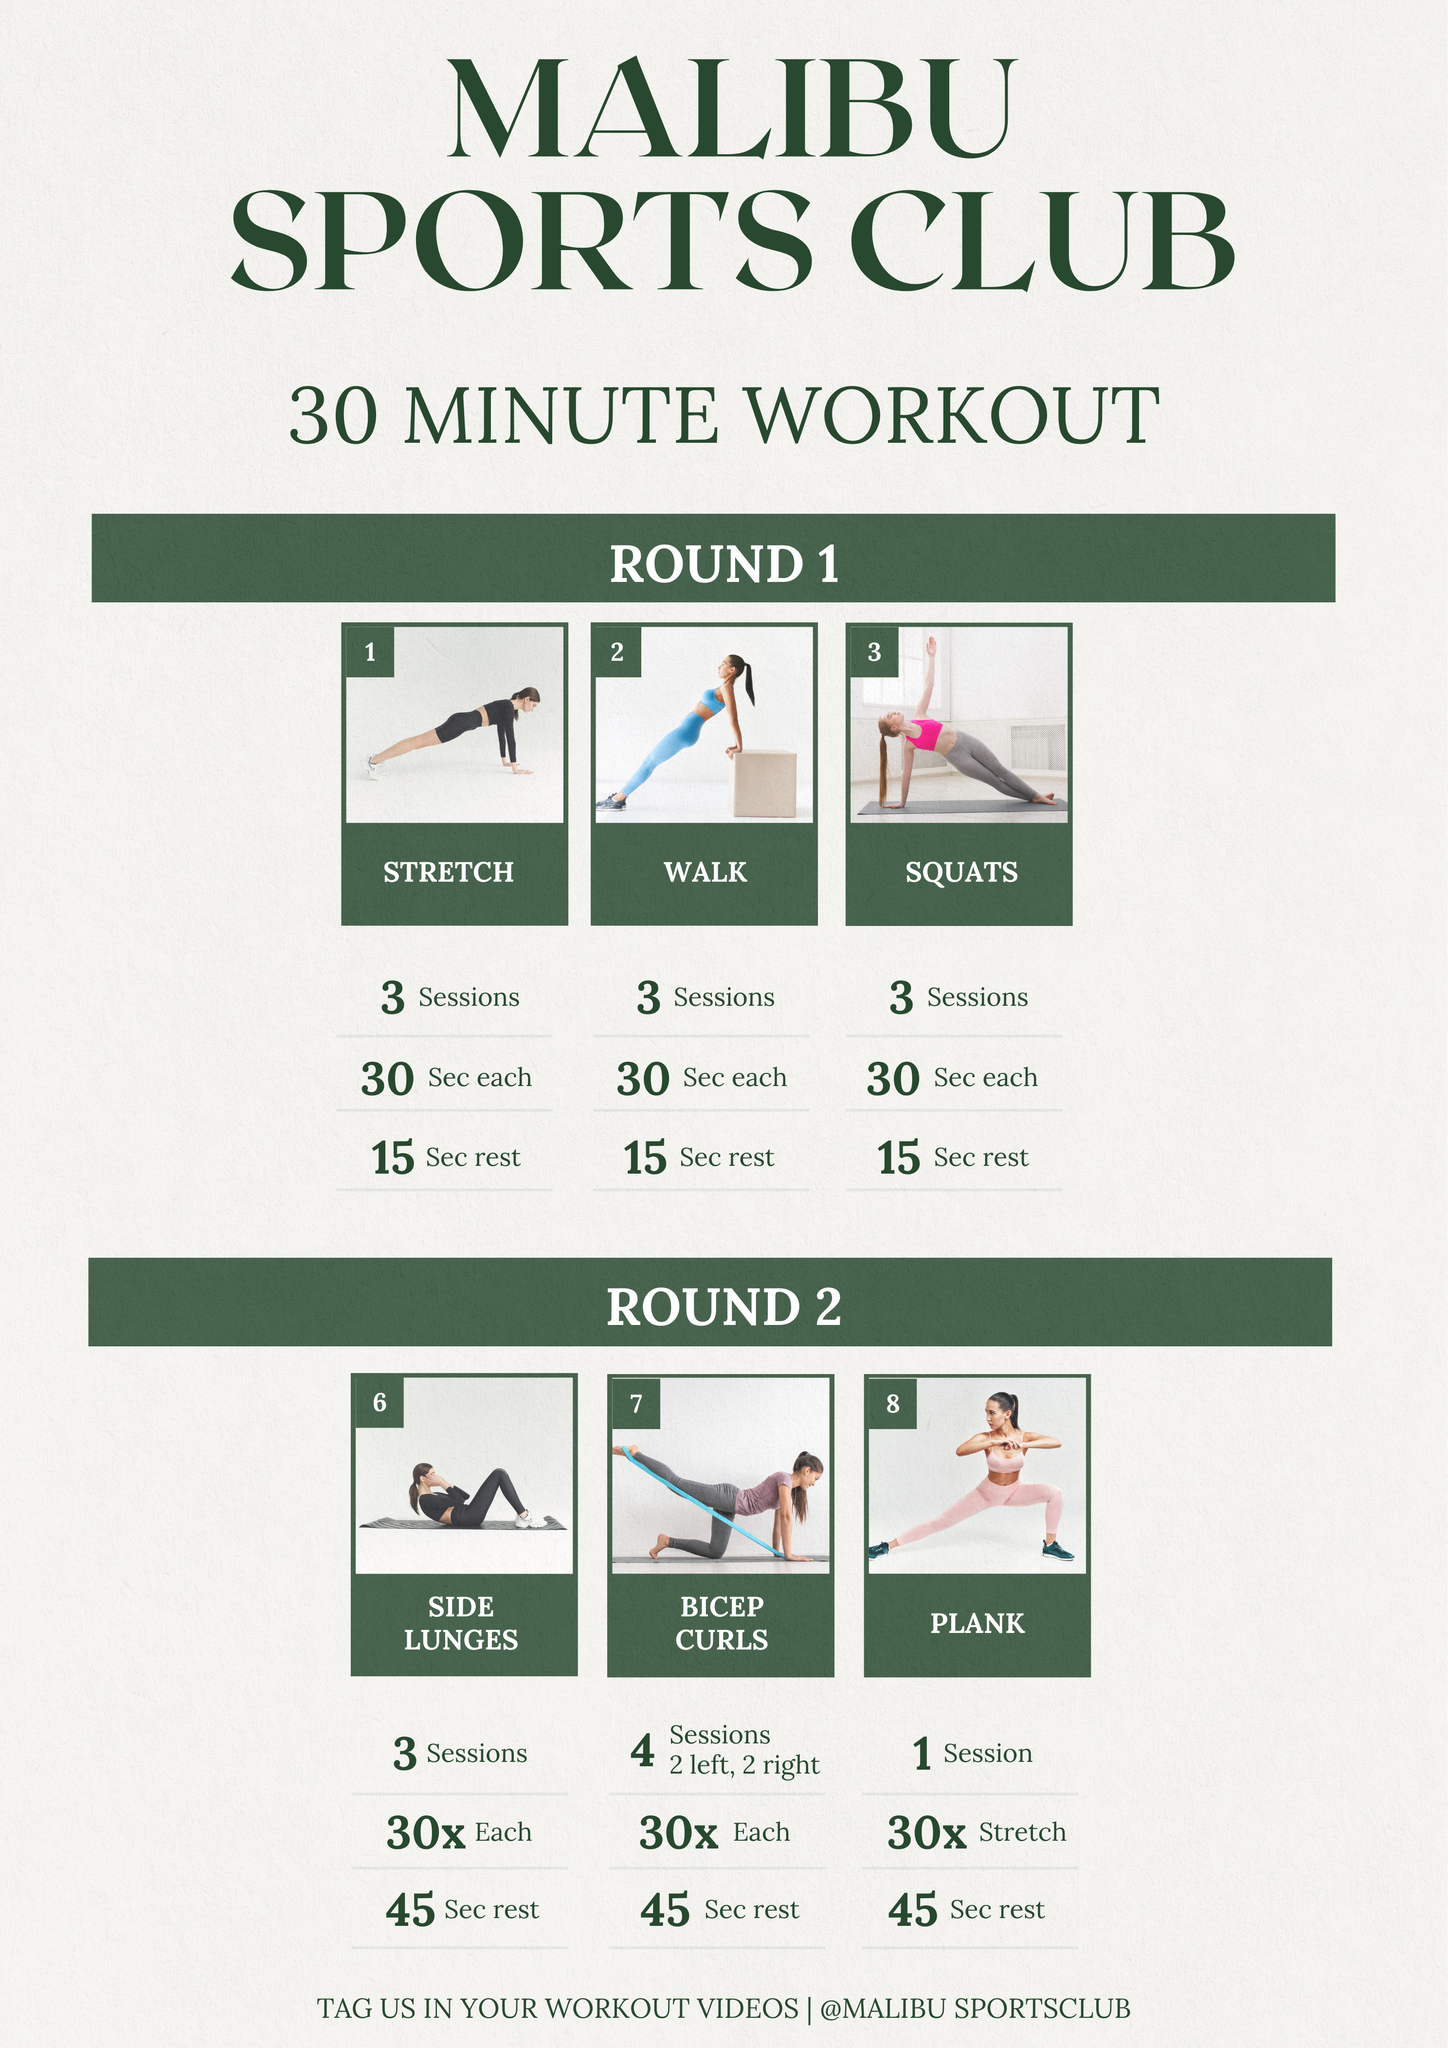 30 MINUTE WORKOUT